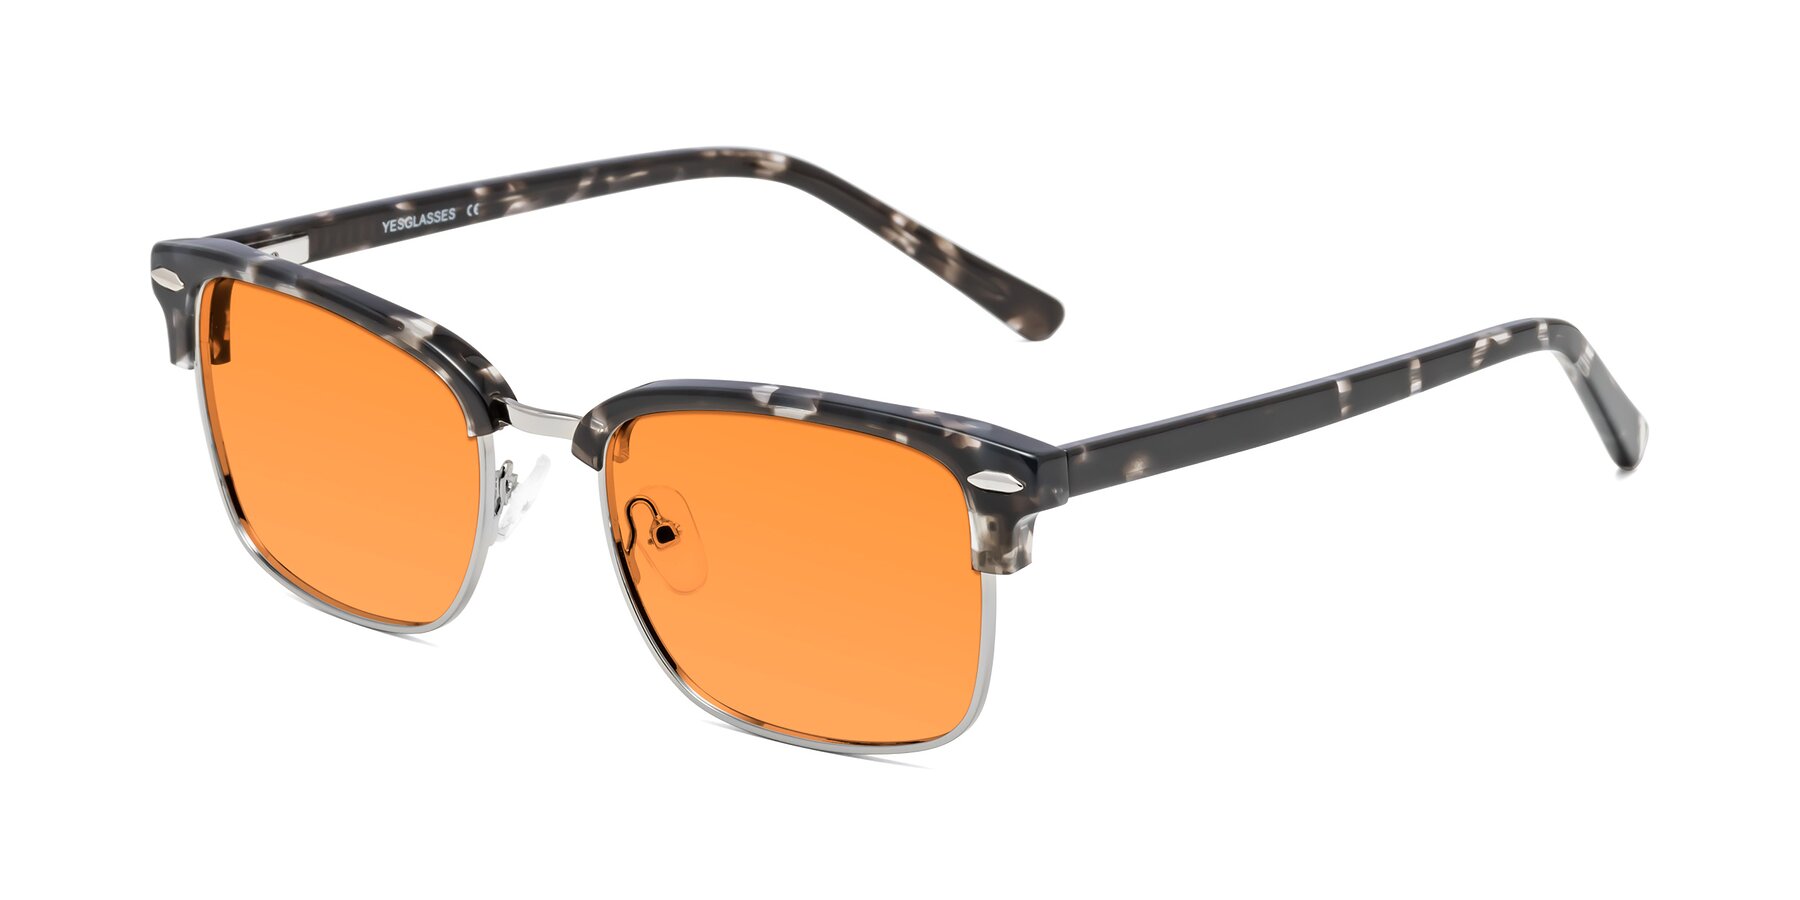 Angle of 17464 in Tortoise-Silver with Orange Tinted Lenses